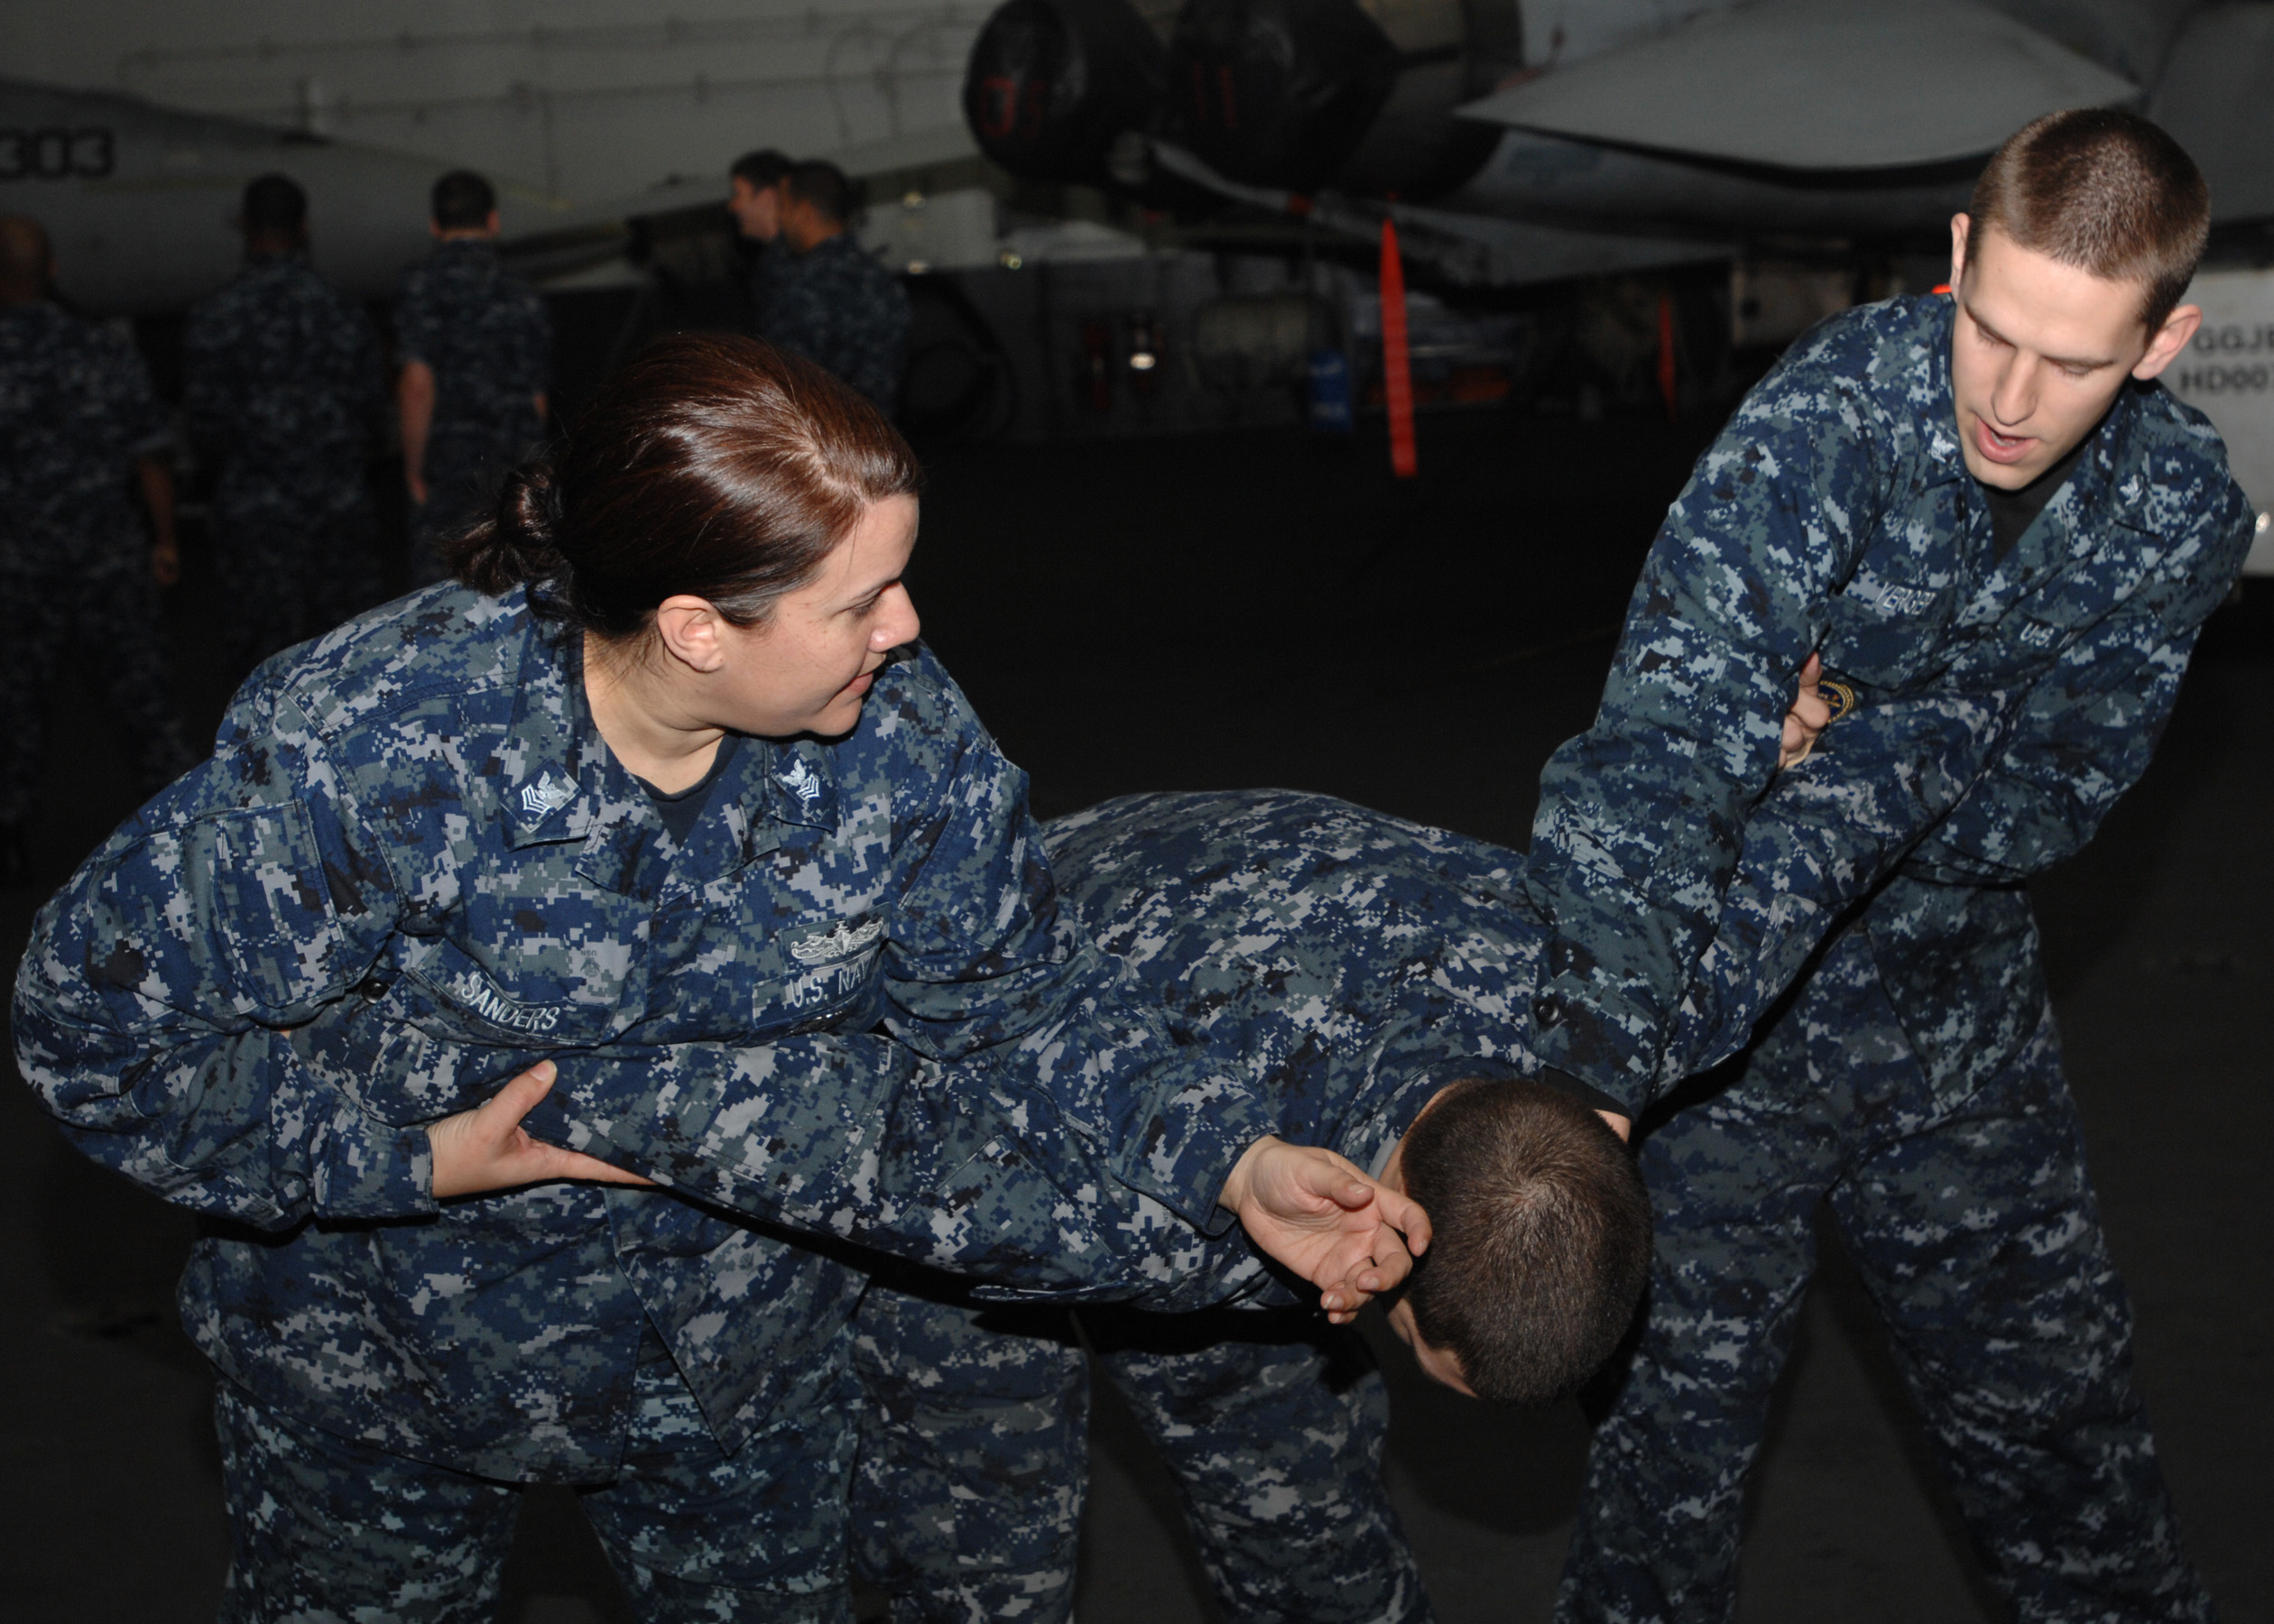 US Navy 100125-N-2798F-002 Master-at-Arms 1st Class Andria Sanders and Aviation Ordnanceman 3rd Class Patrick Yeger practice self-defense techniques on a fellow Sailor